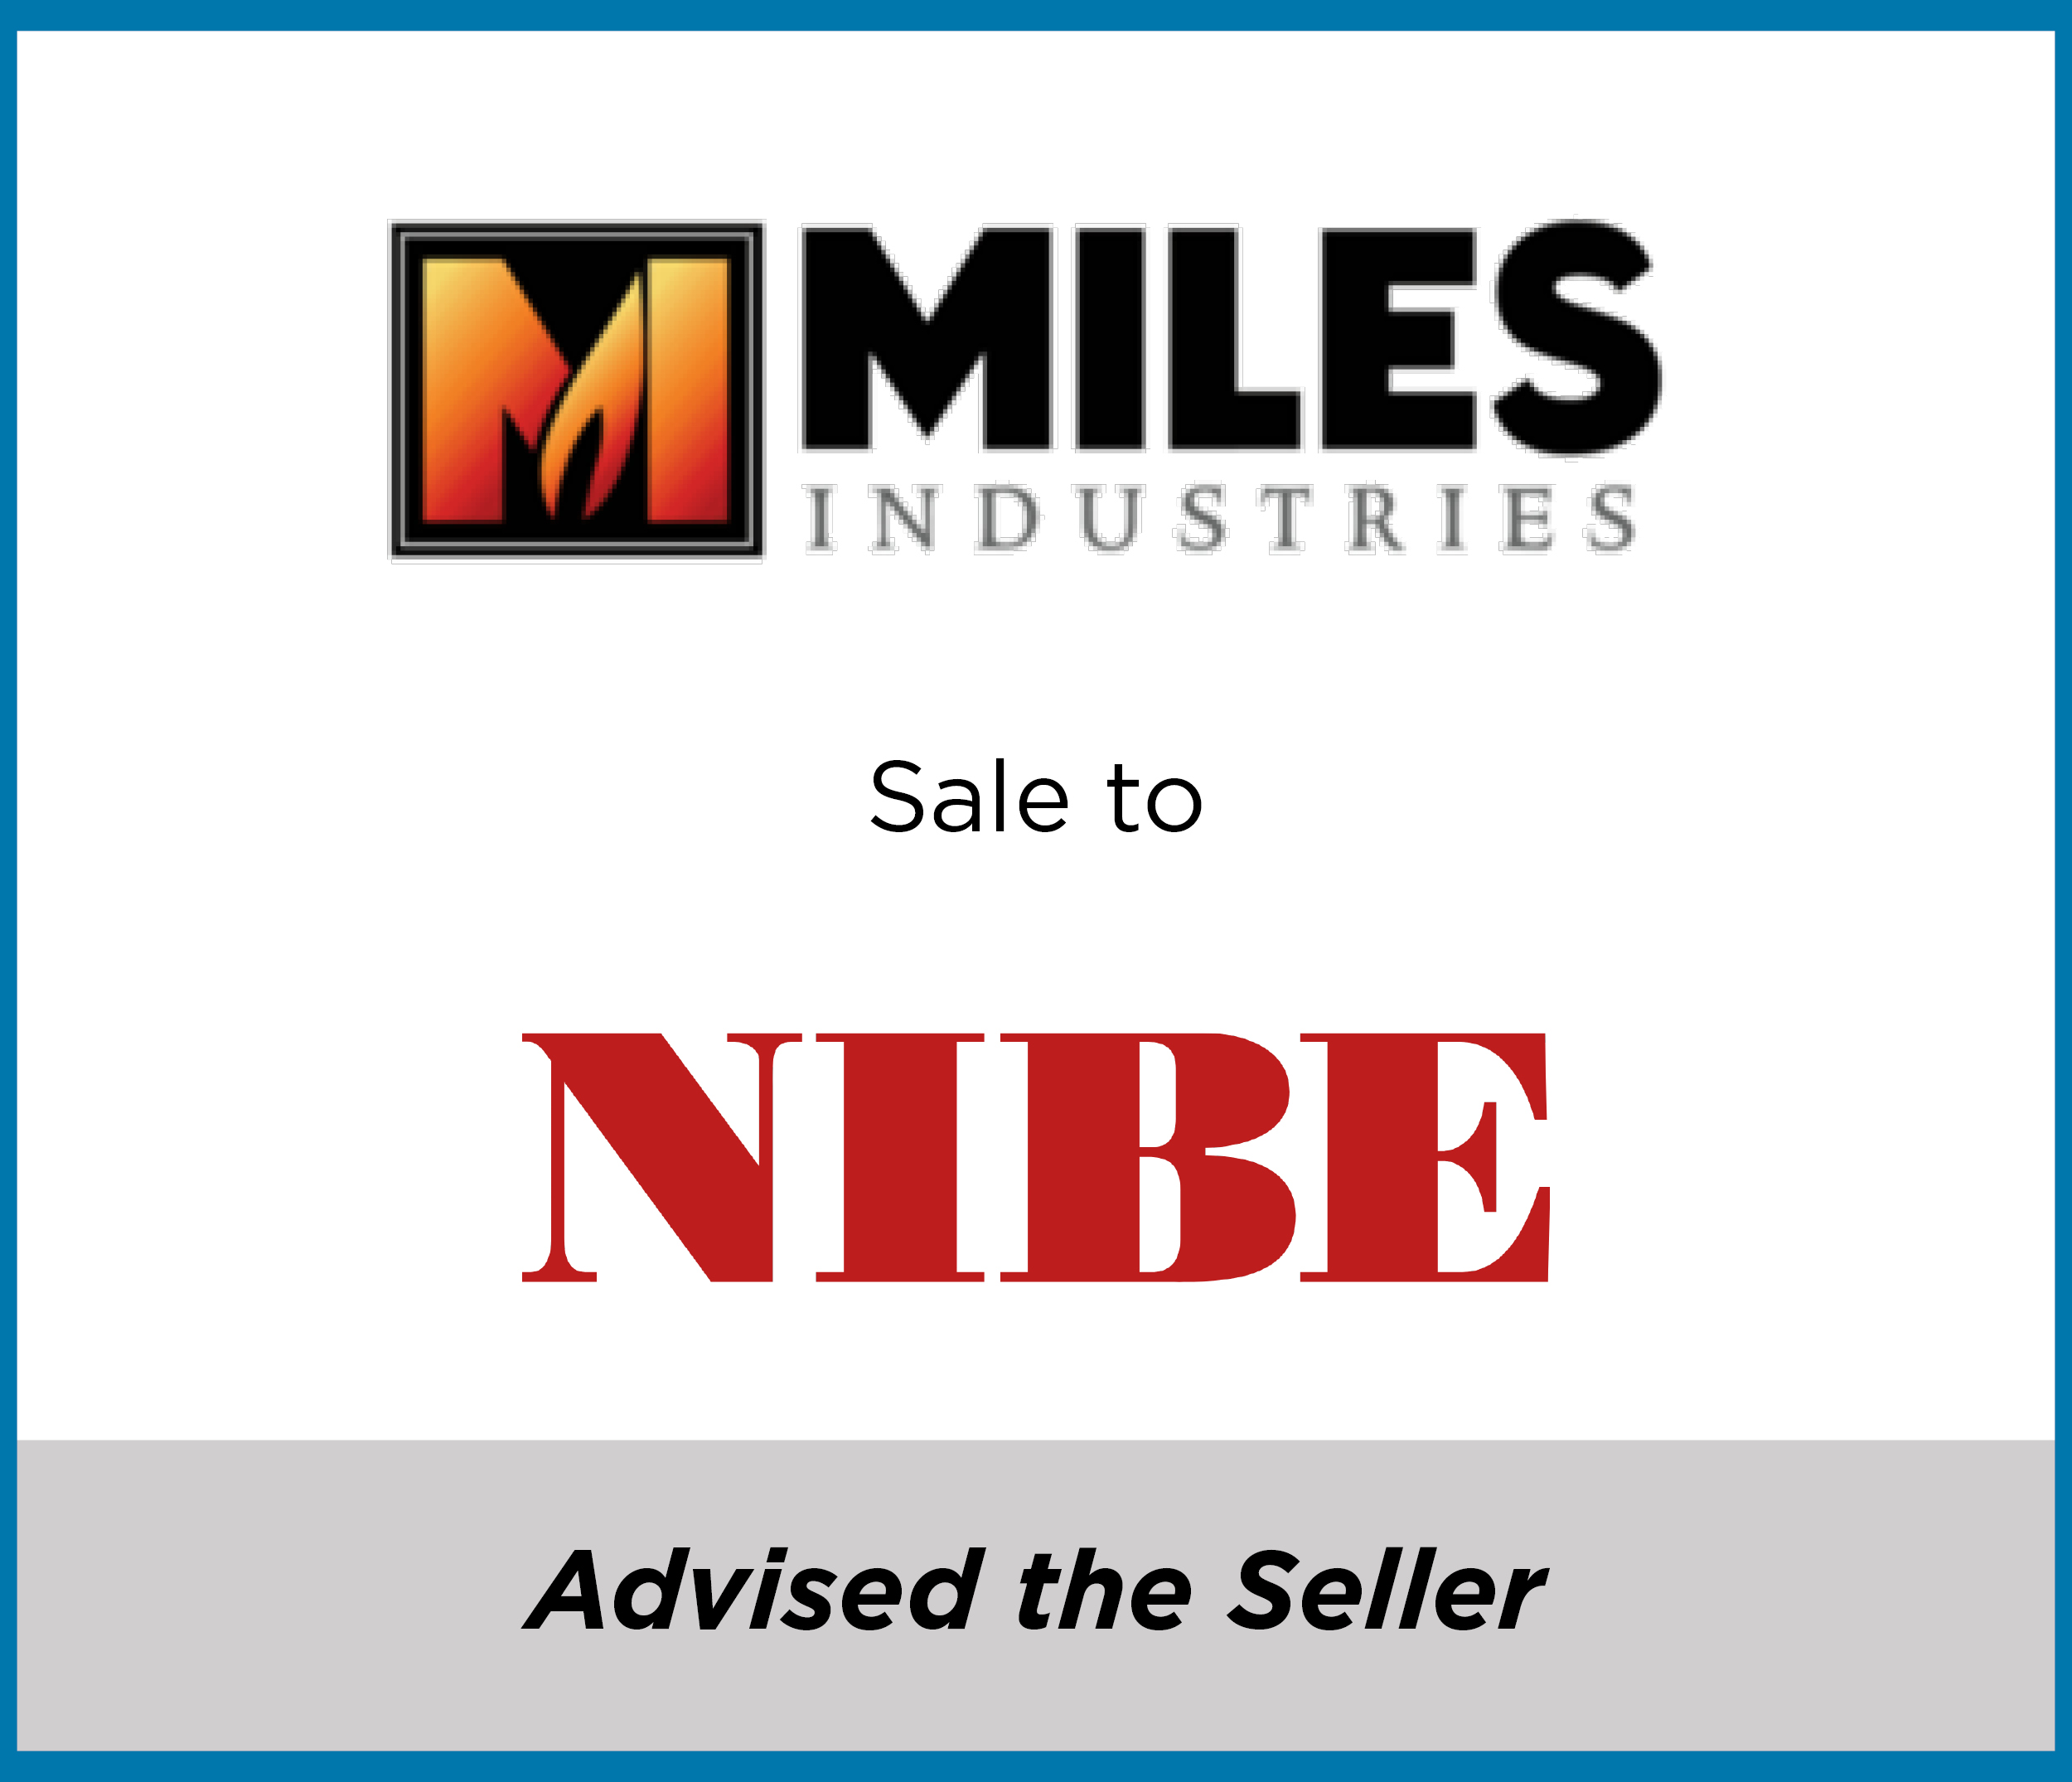 Miles Industries sale to NIBE (luxury fireplaces)